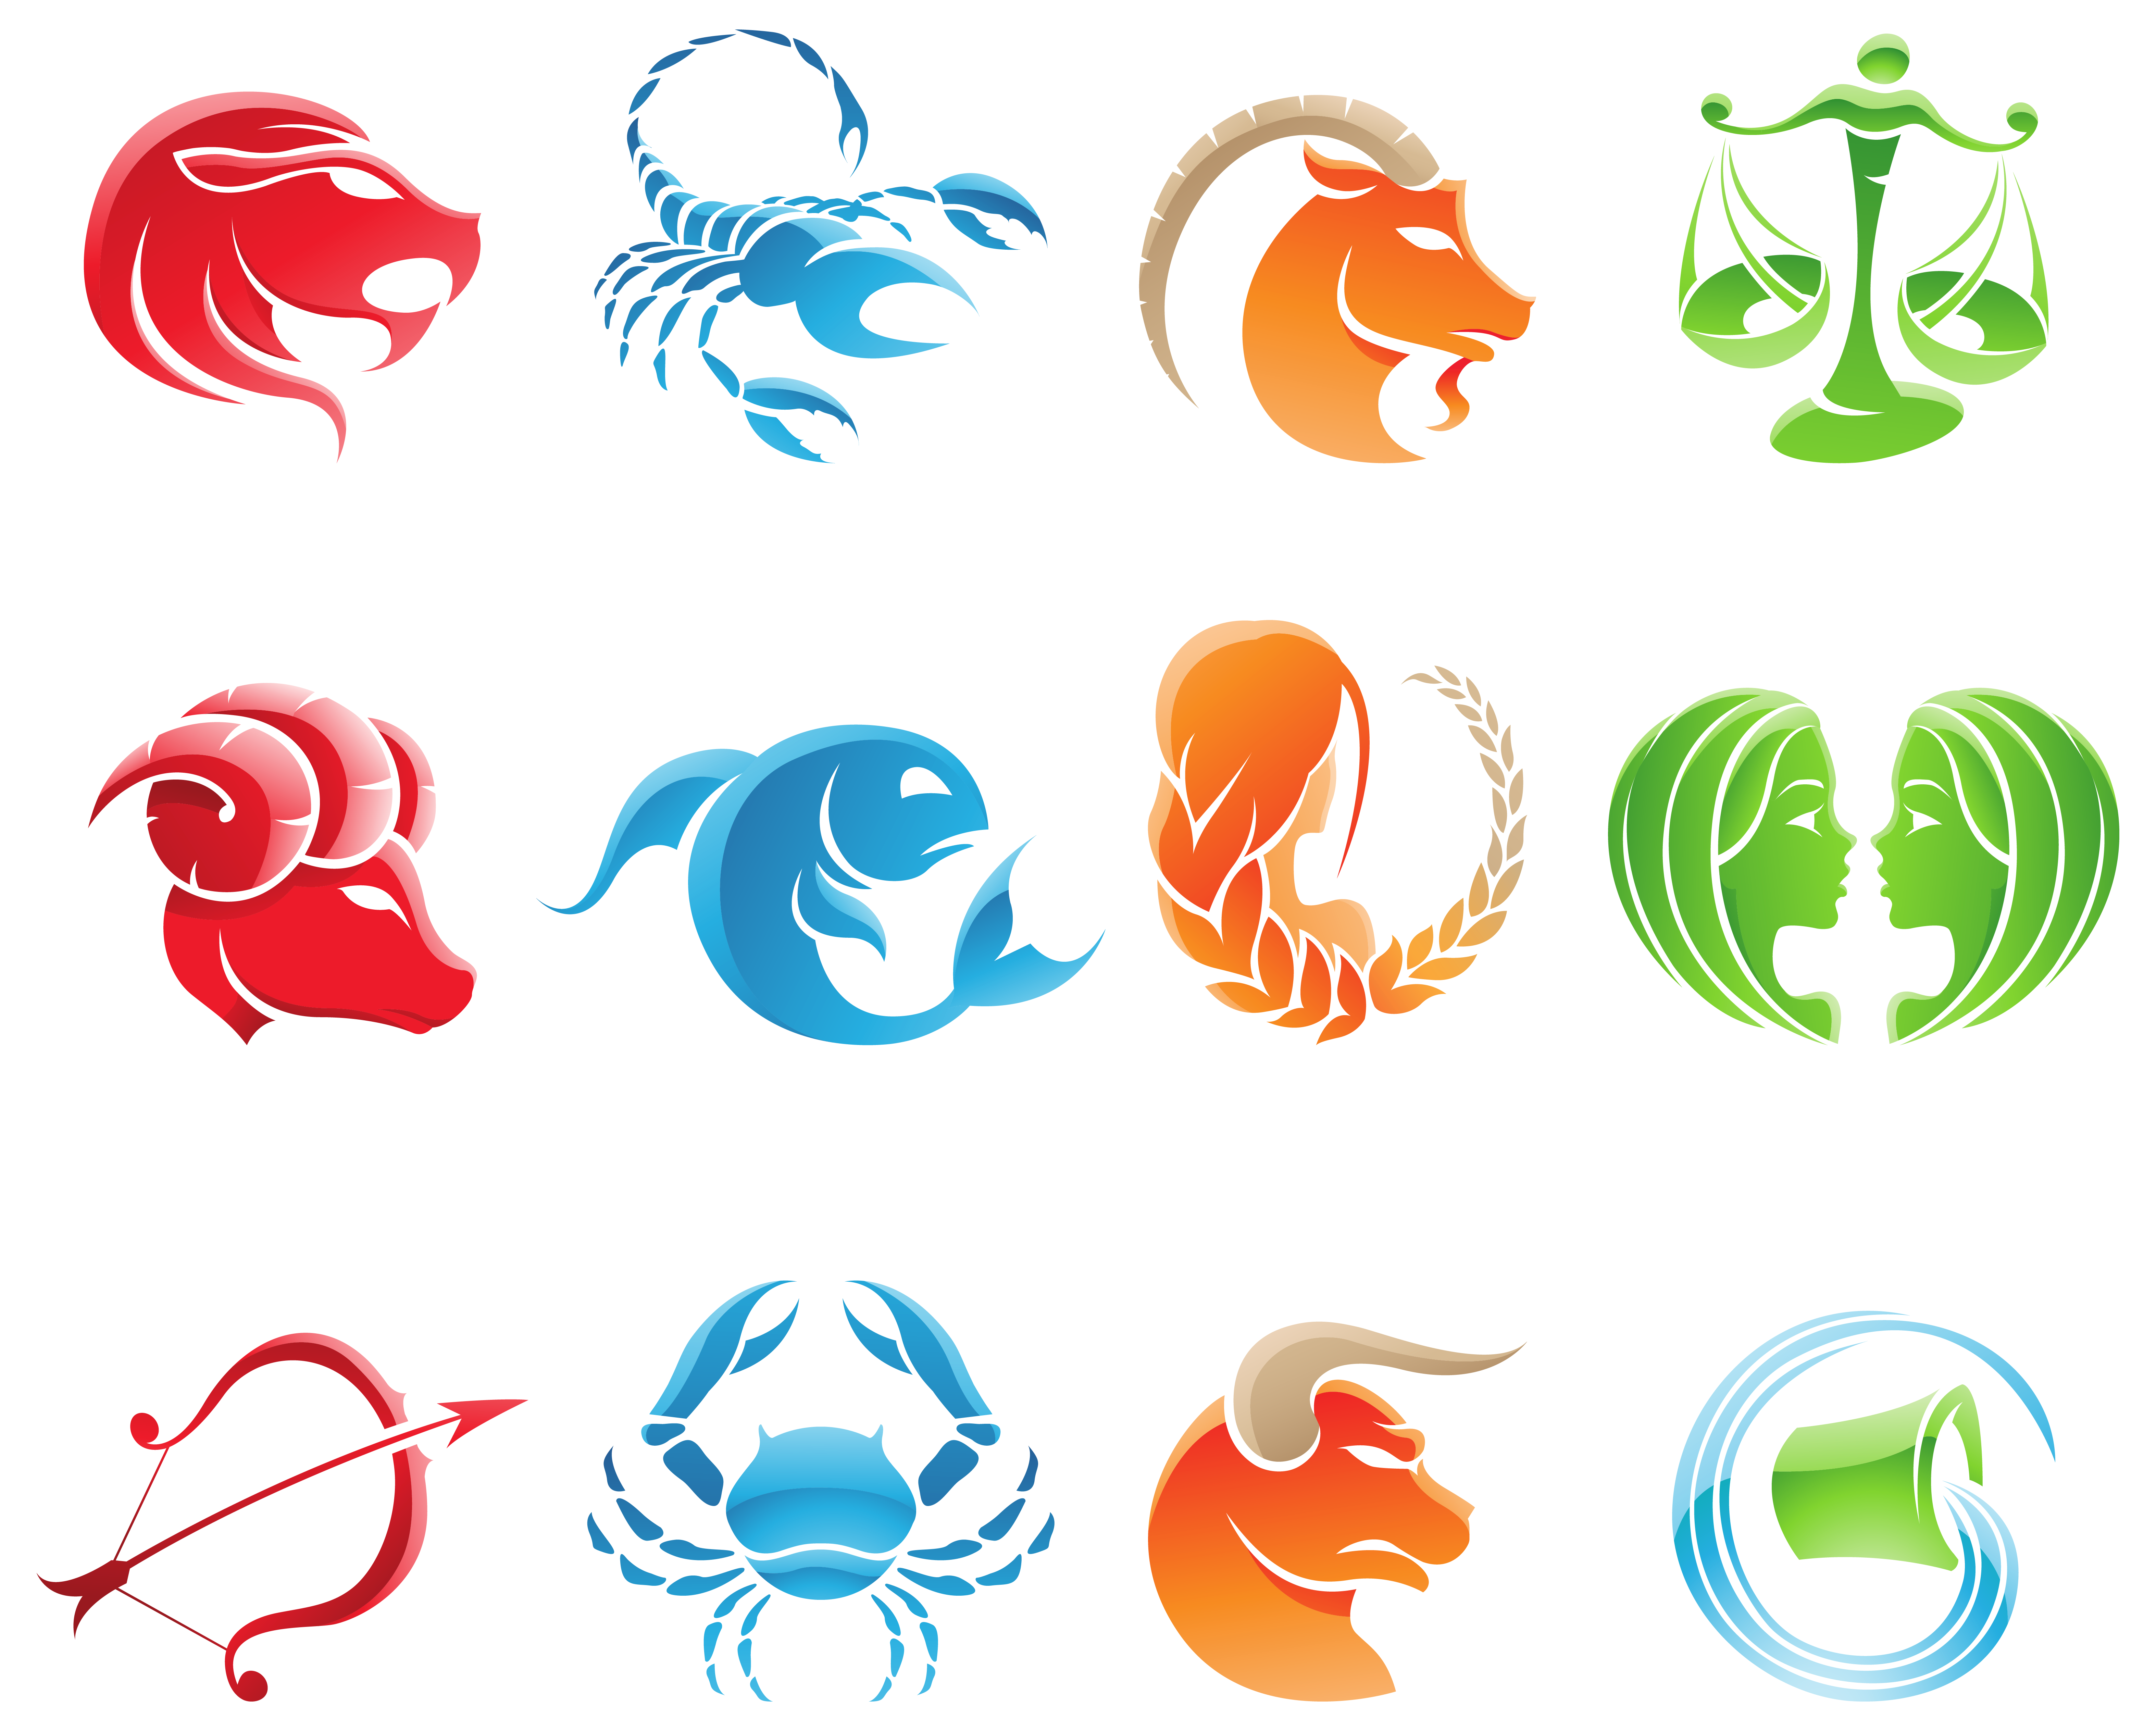 Signs of the zodiac clipart - Clipground